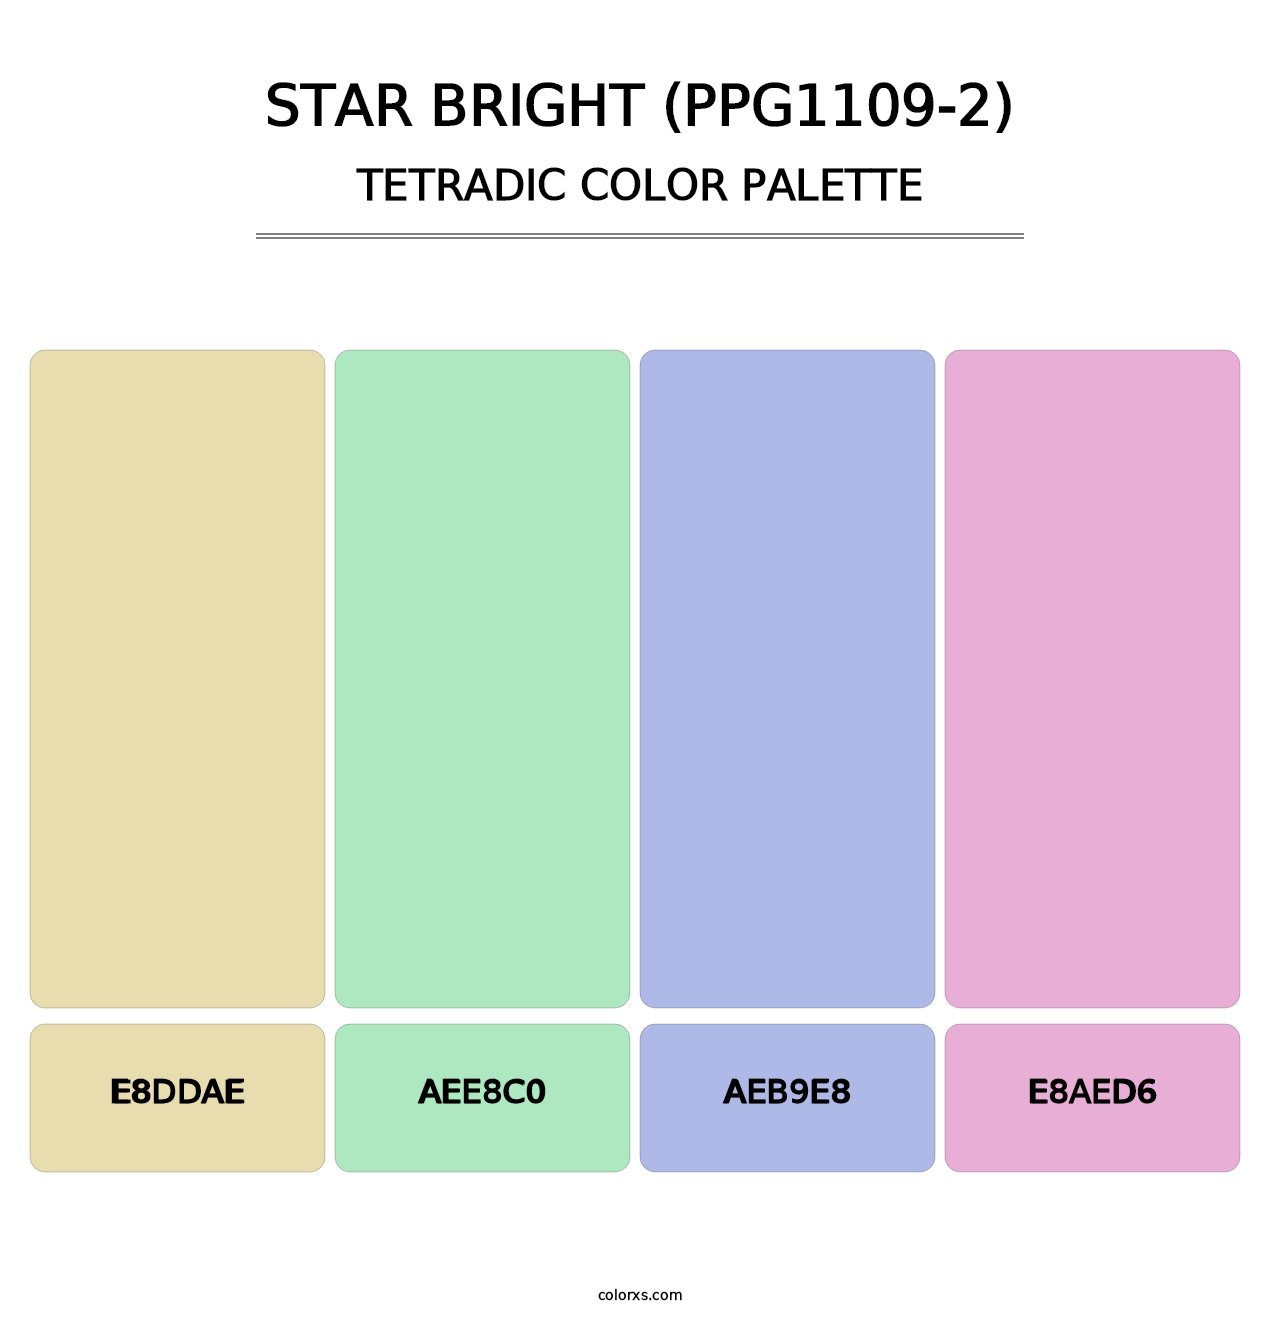 Star Bright (PPG1109-2) - Tetradic Color Palette